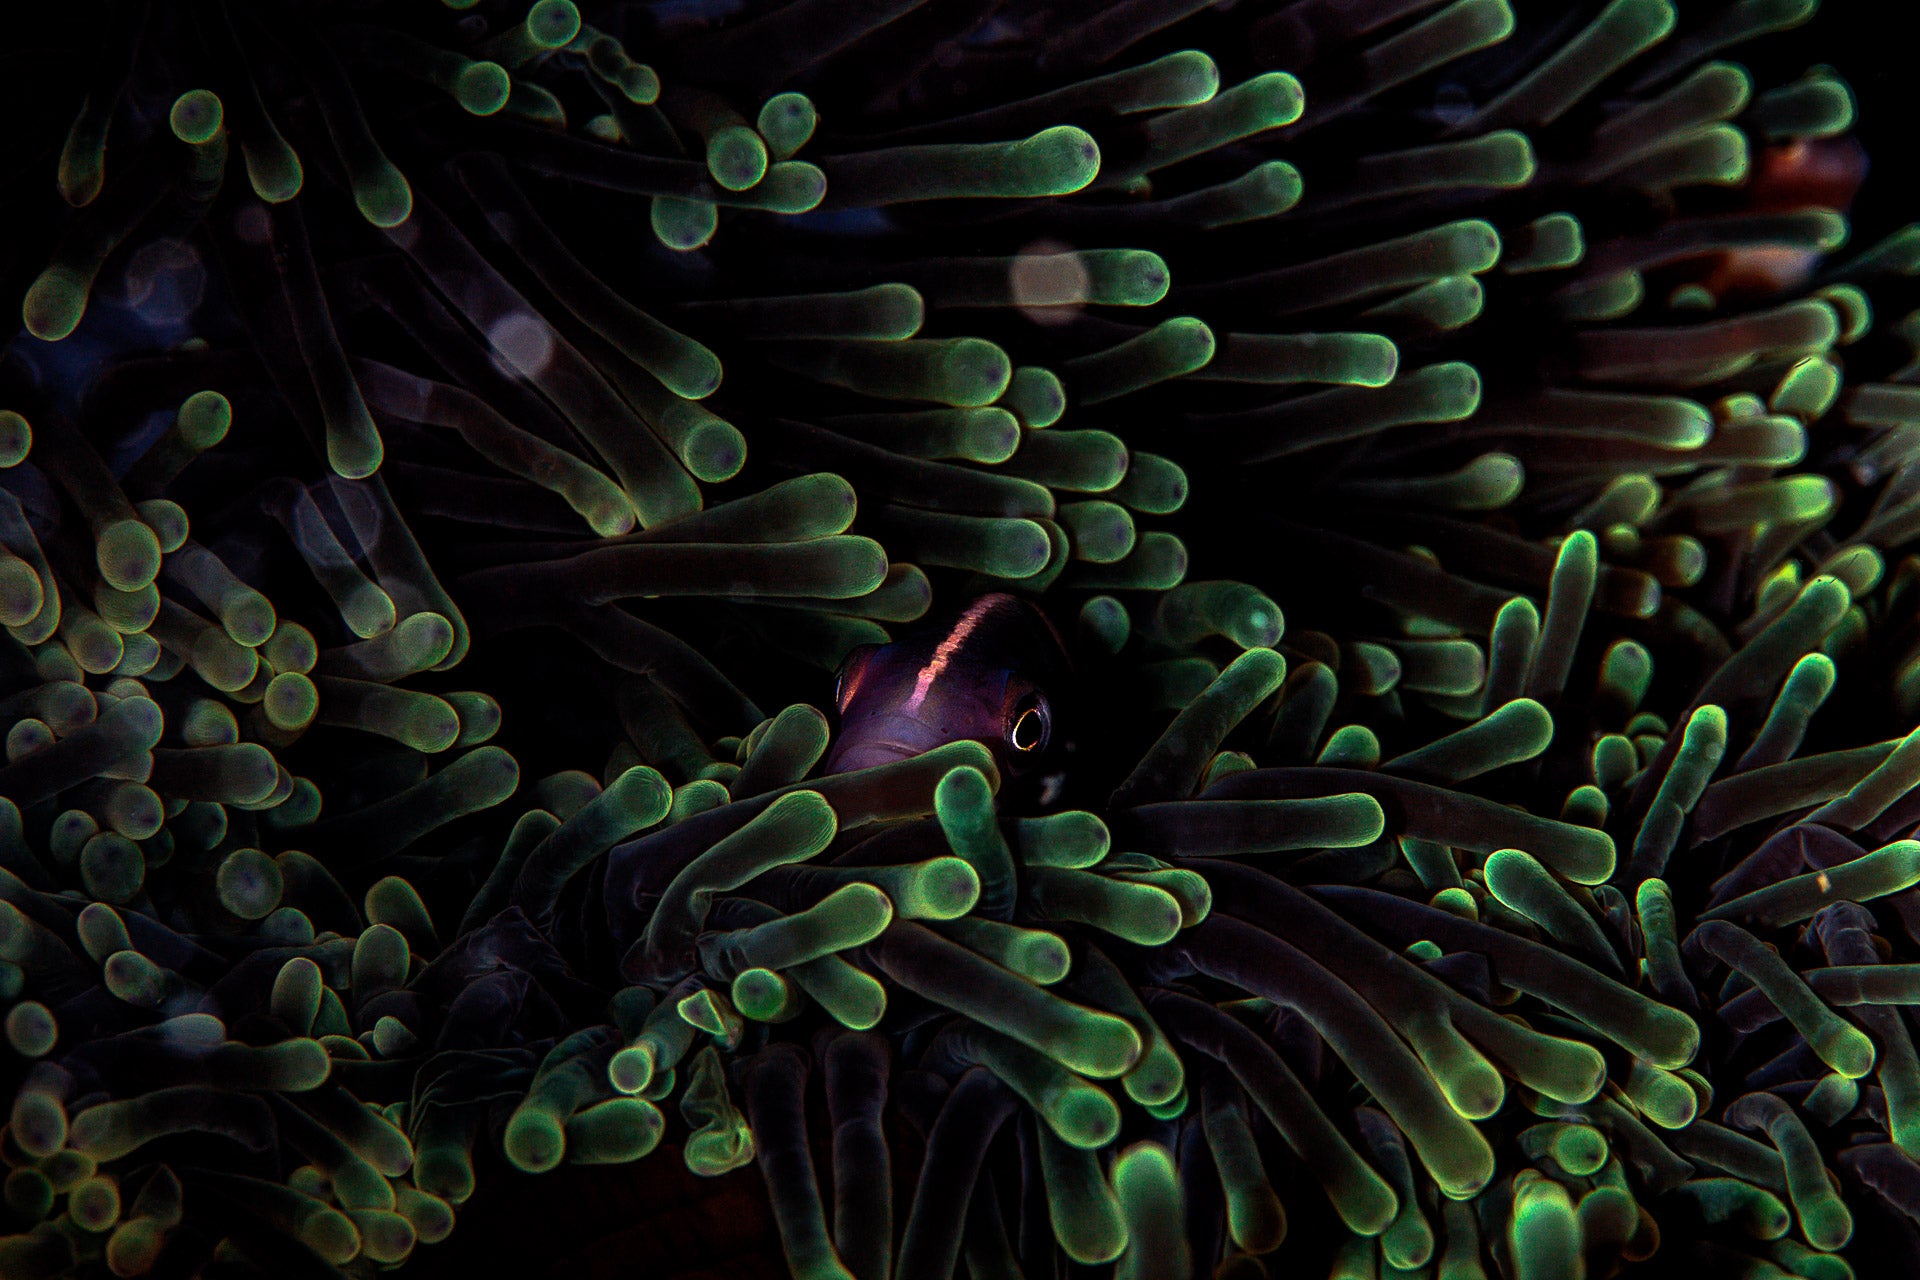 nature ttl photographer of the year purple fish in anemone